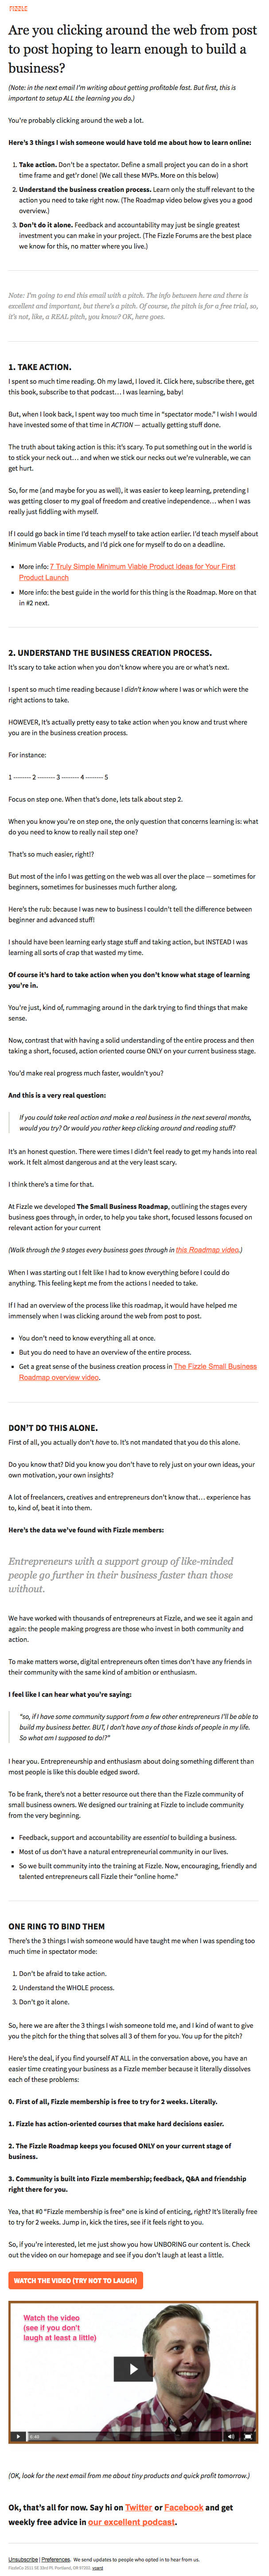 Email Newsletter Example: Fizzle